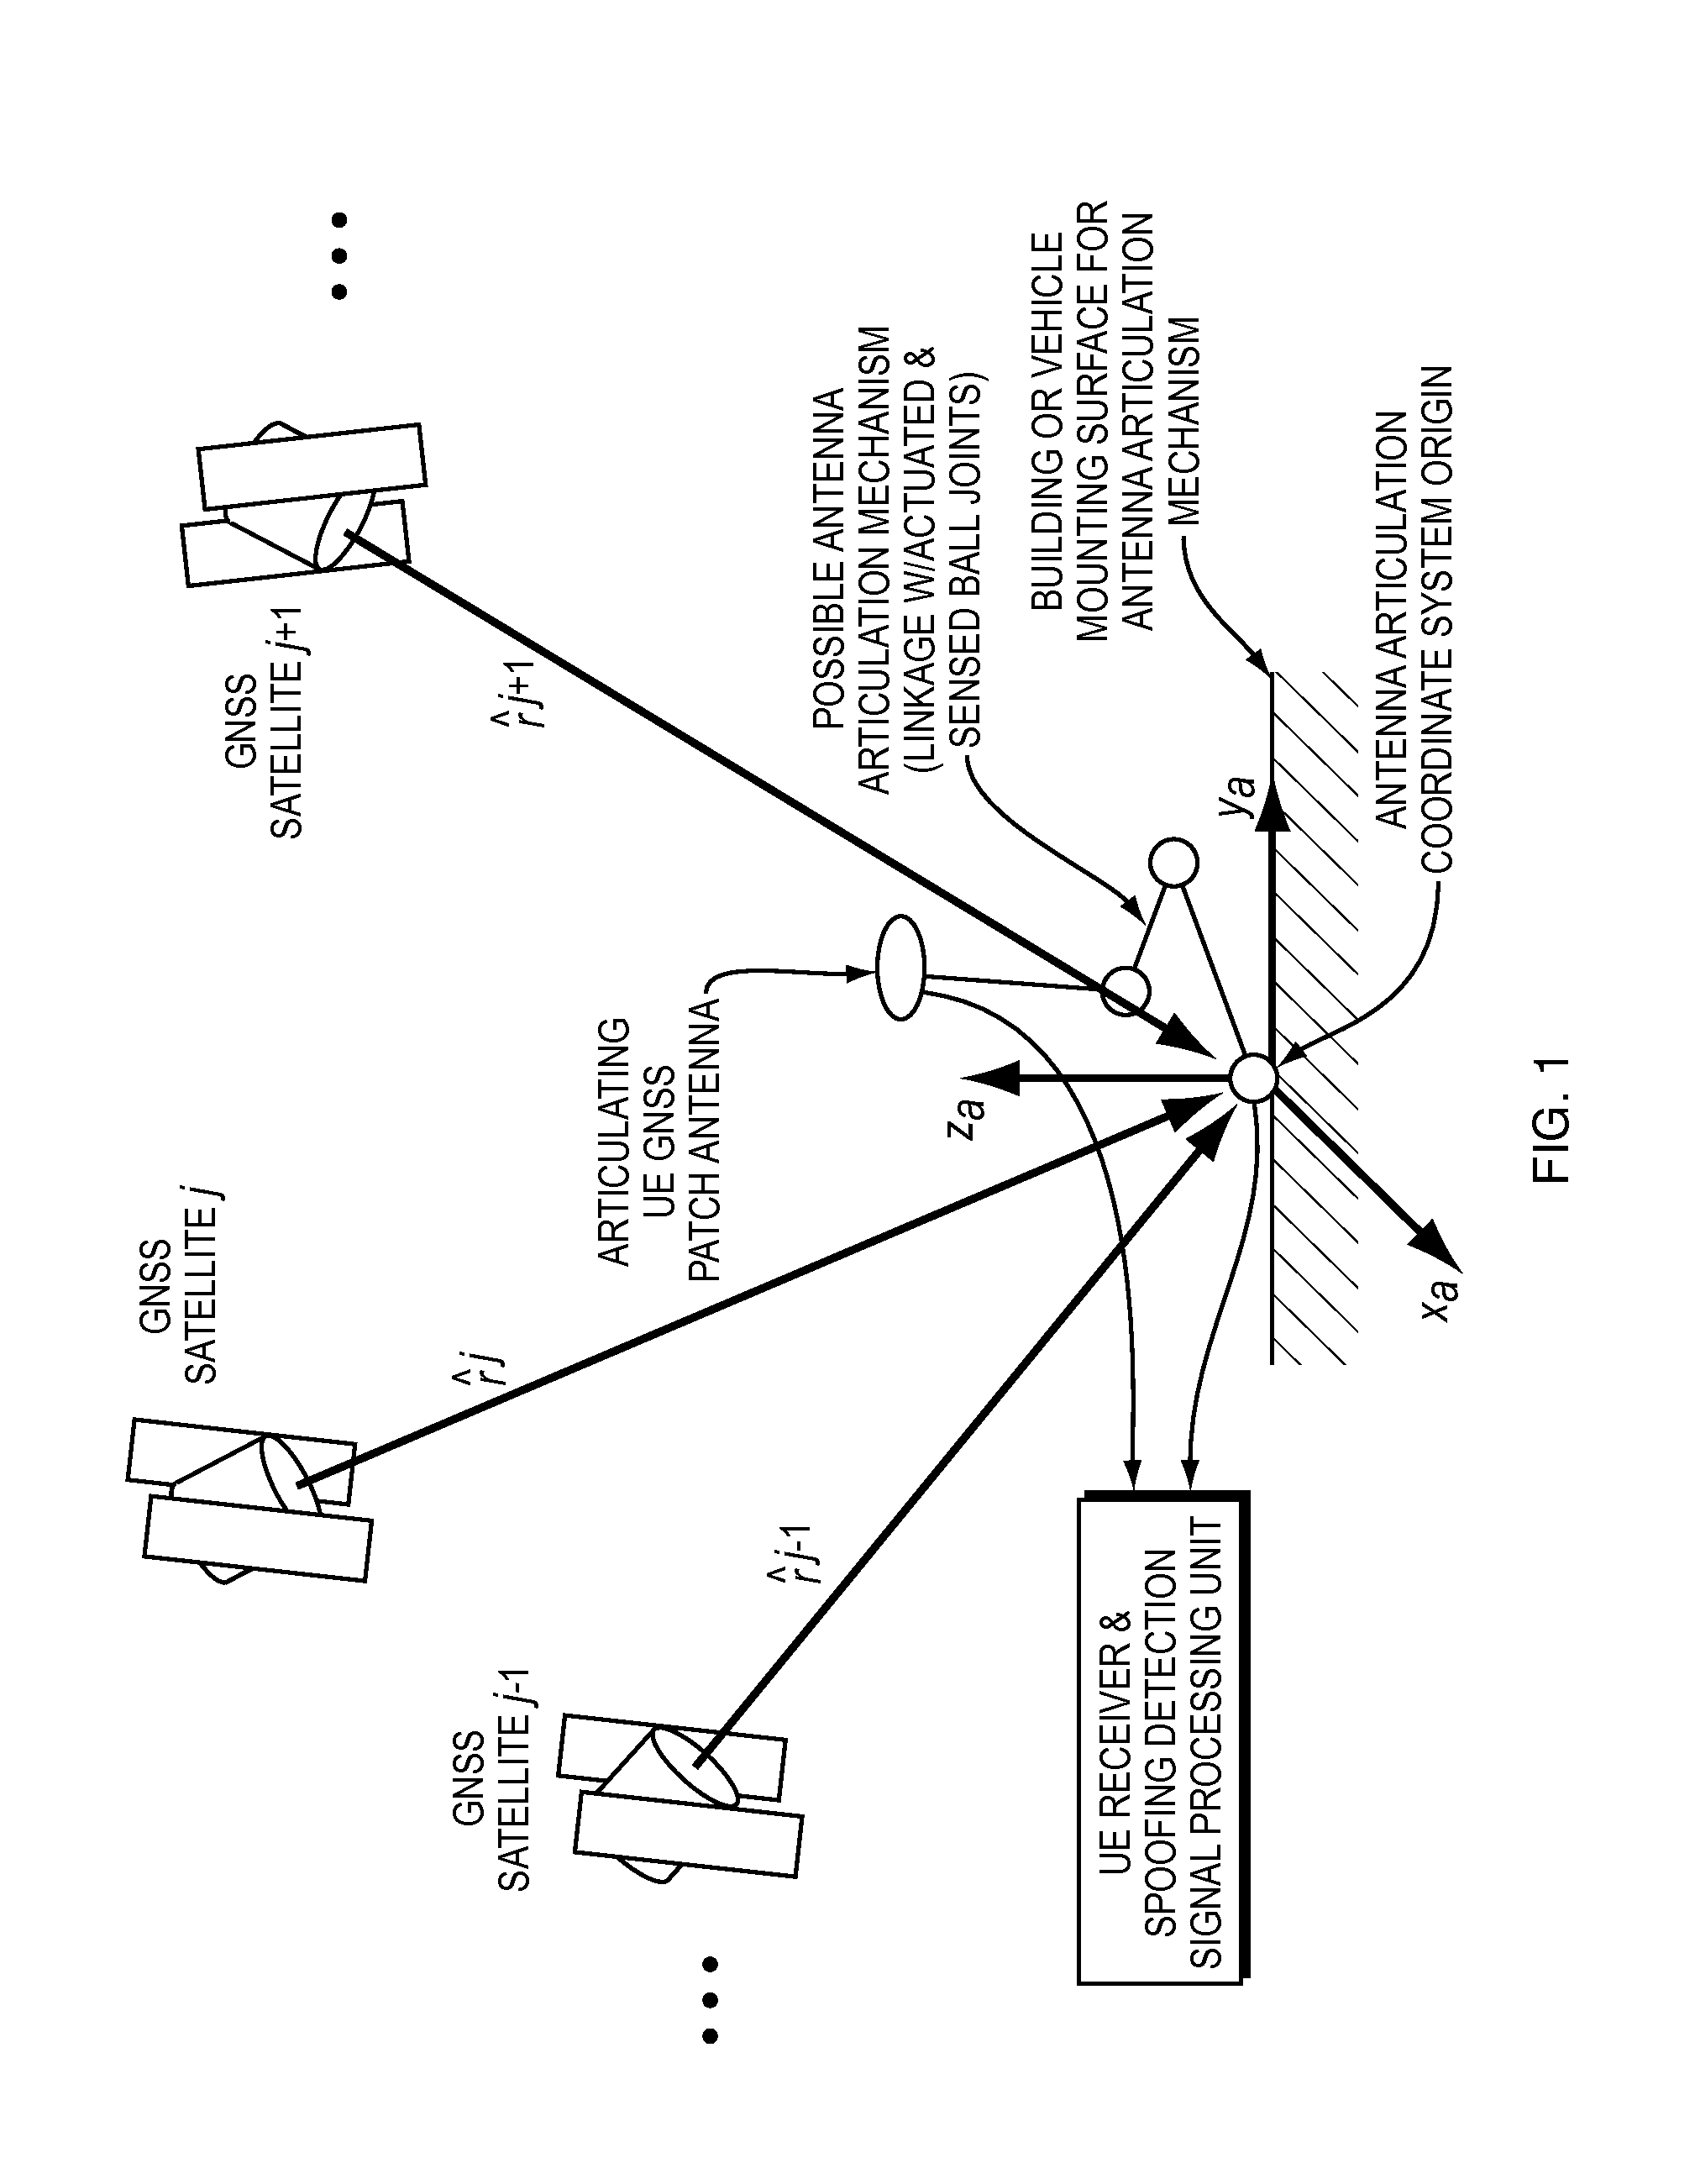 Methods and apparatus for detecting spoofing of global navigation satellite system signals using carrier phase measurements and known antenna motions